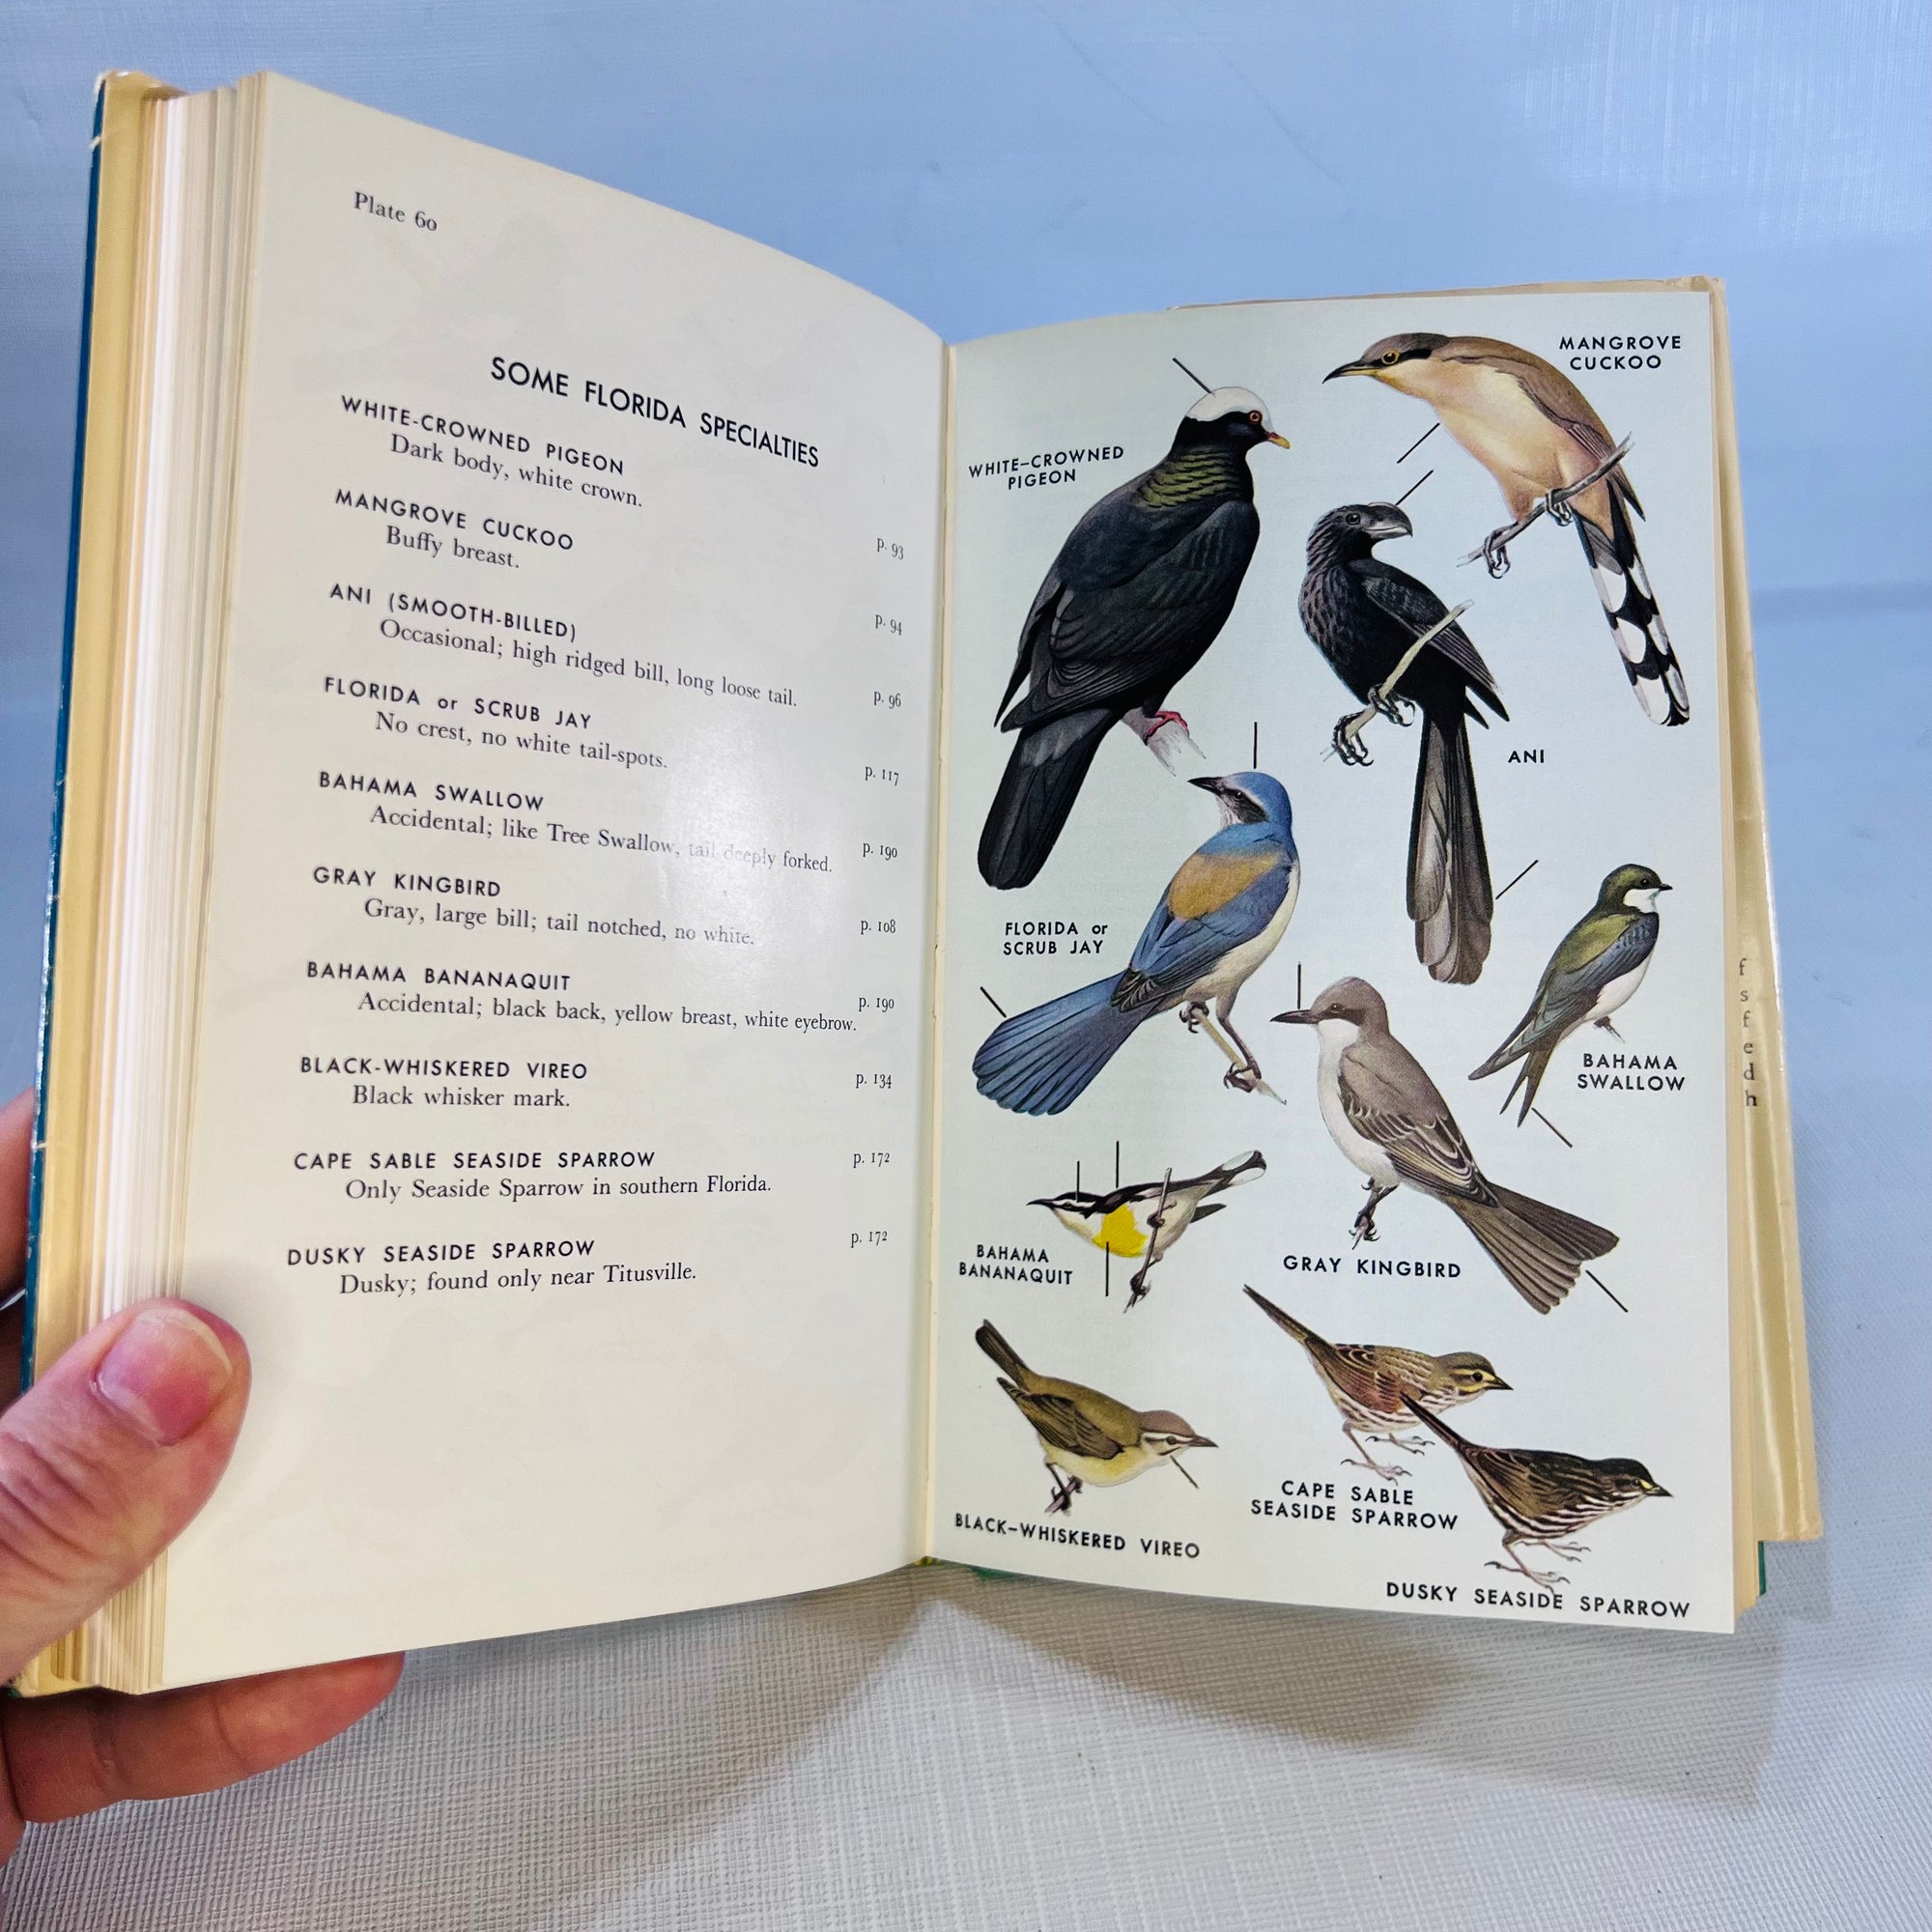 A Field Guide to the Birds Eastern Land and Water Birds by Roger Peterson 1947 Part of the Peterson Guide Series Houghton Miffin Company